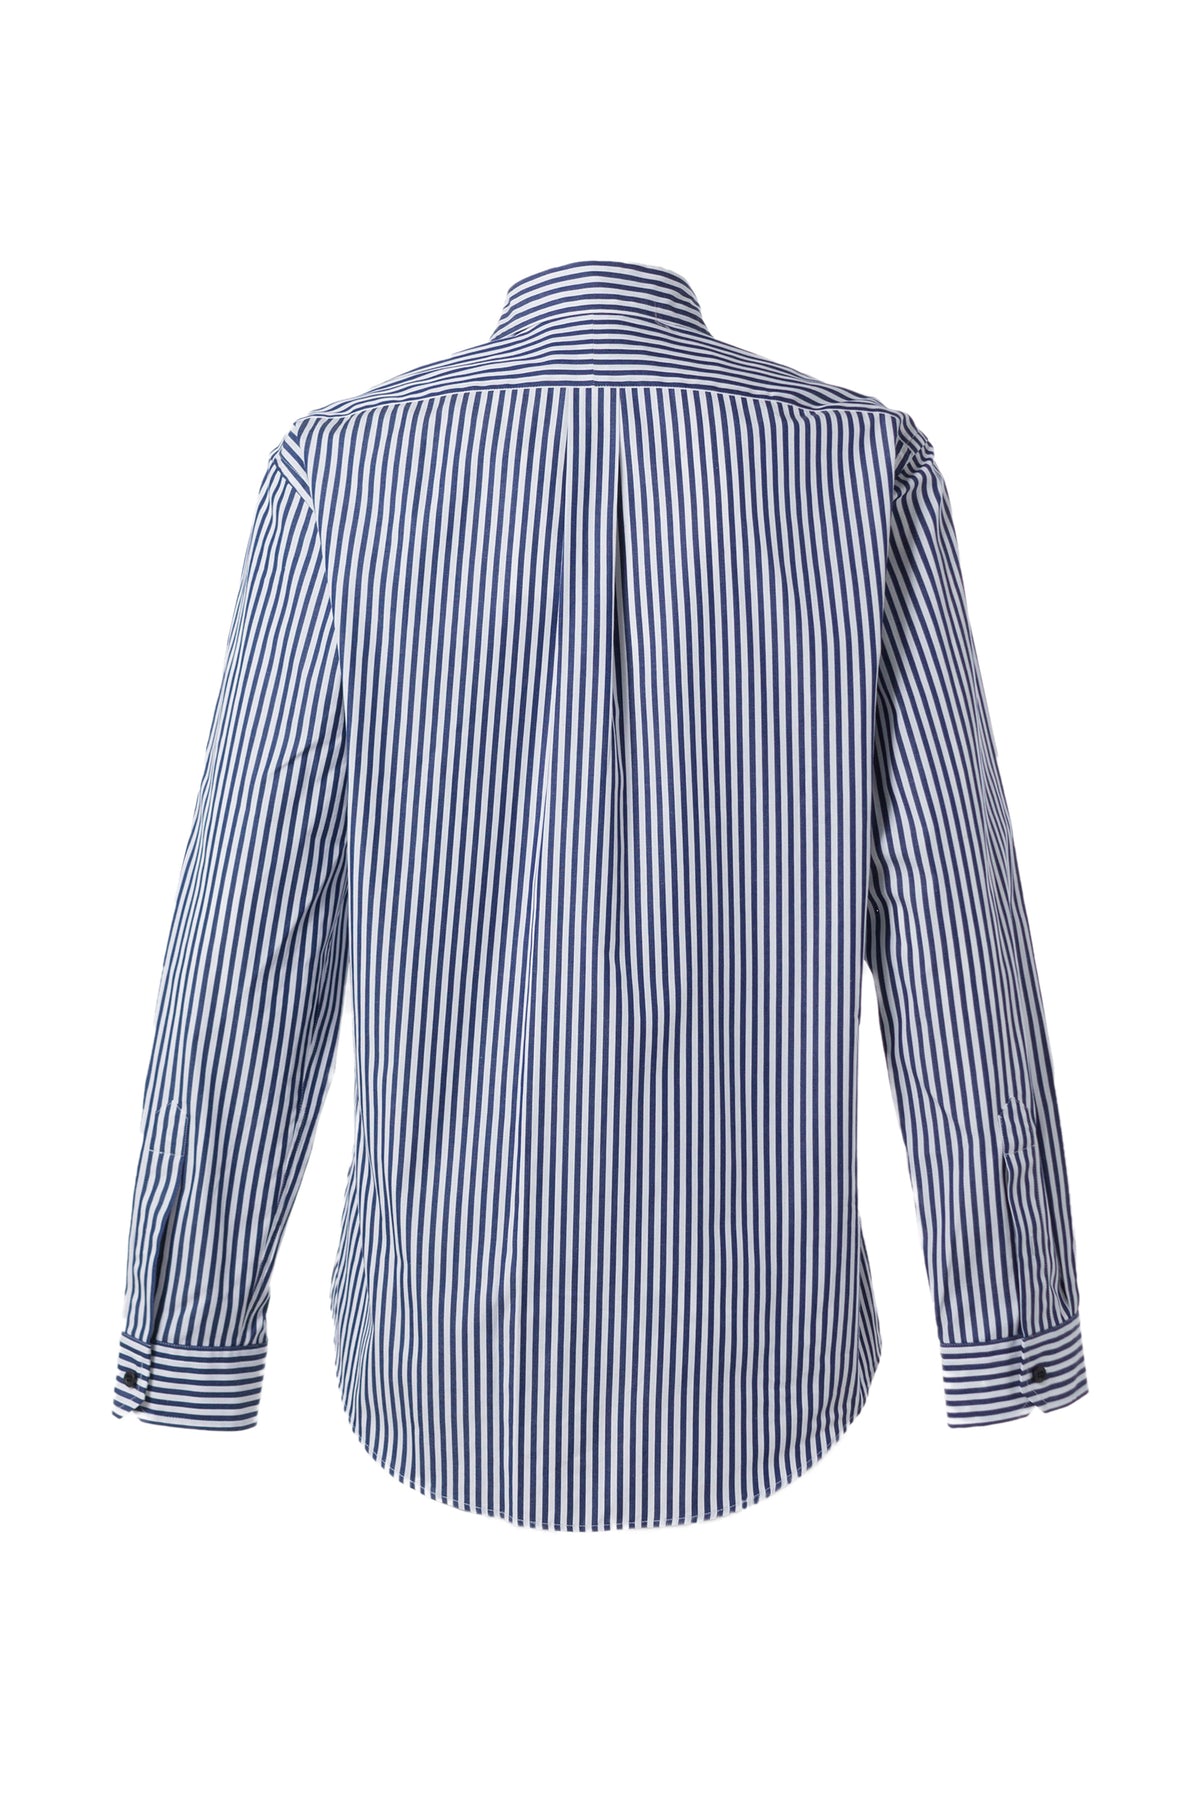 Y/PROJECT PINCHED LOGO STRIPE SHIRT / NVY/WHT